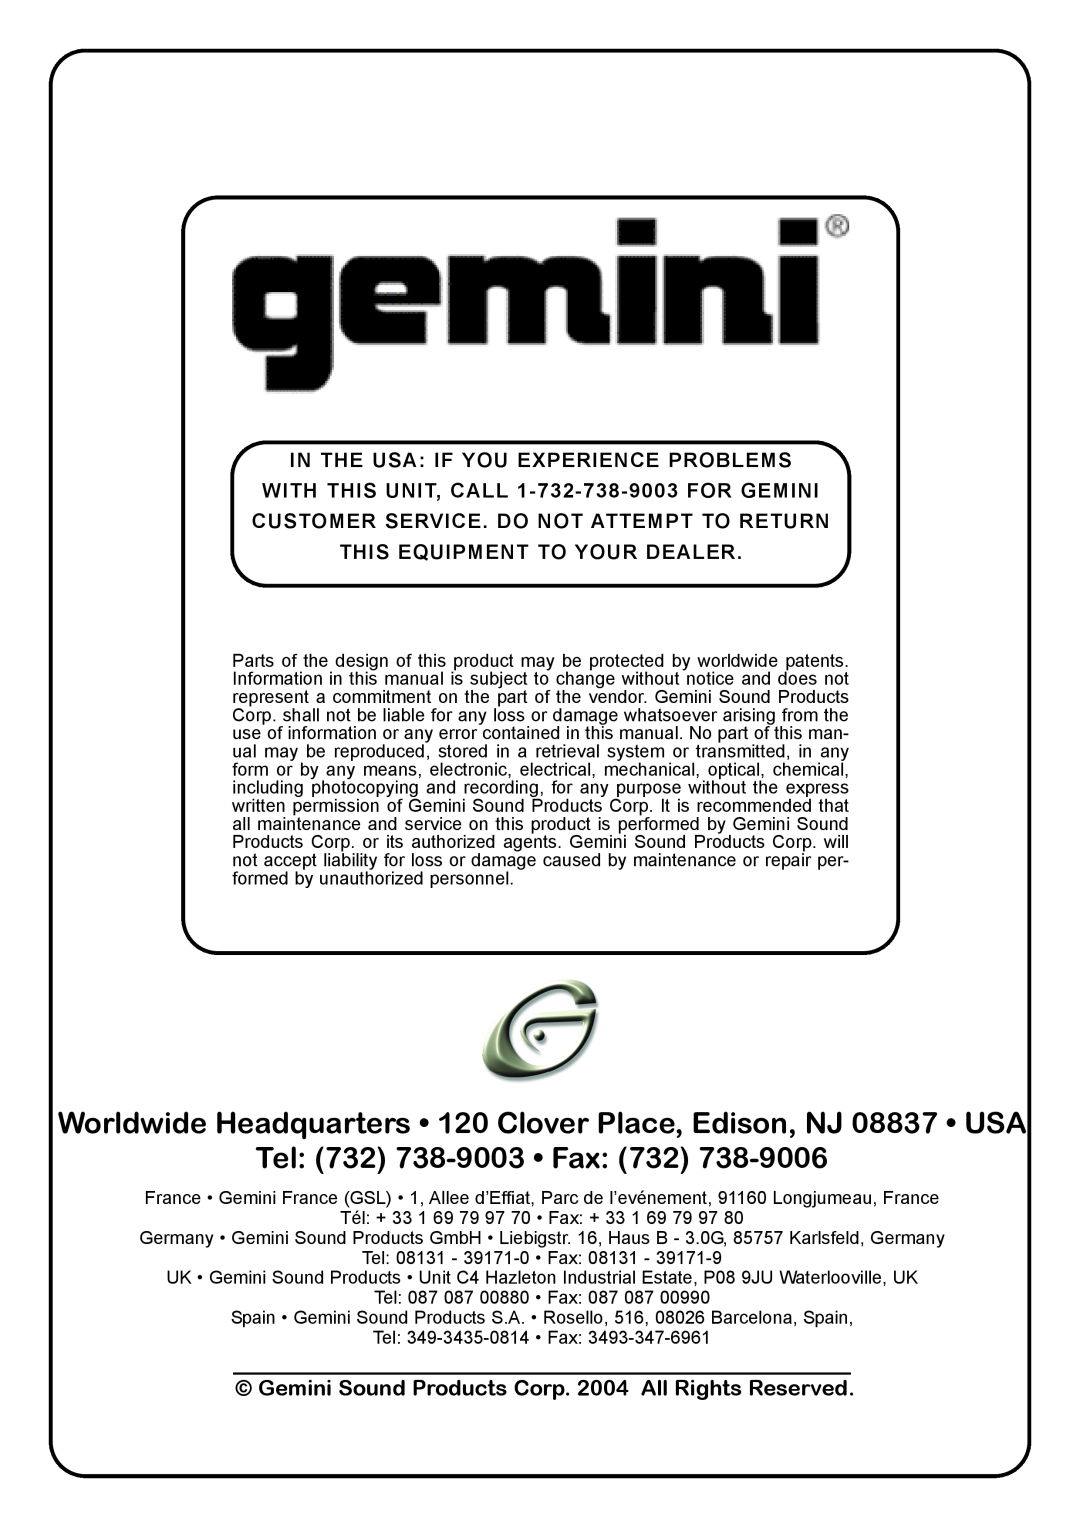 Gemini TT-04 In The Usa: If You Experience Problems, WITH THIS UNIT, CALL 1-732-738-9003FOR GEMINI, Tel 732 738-9003 Fax 